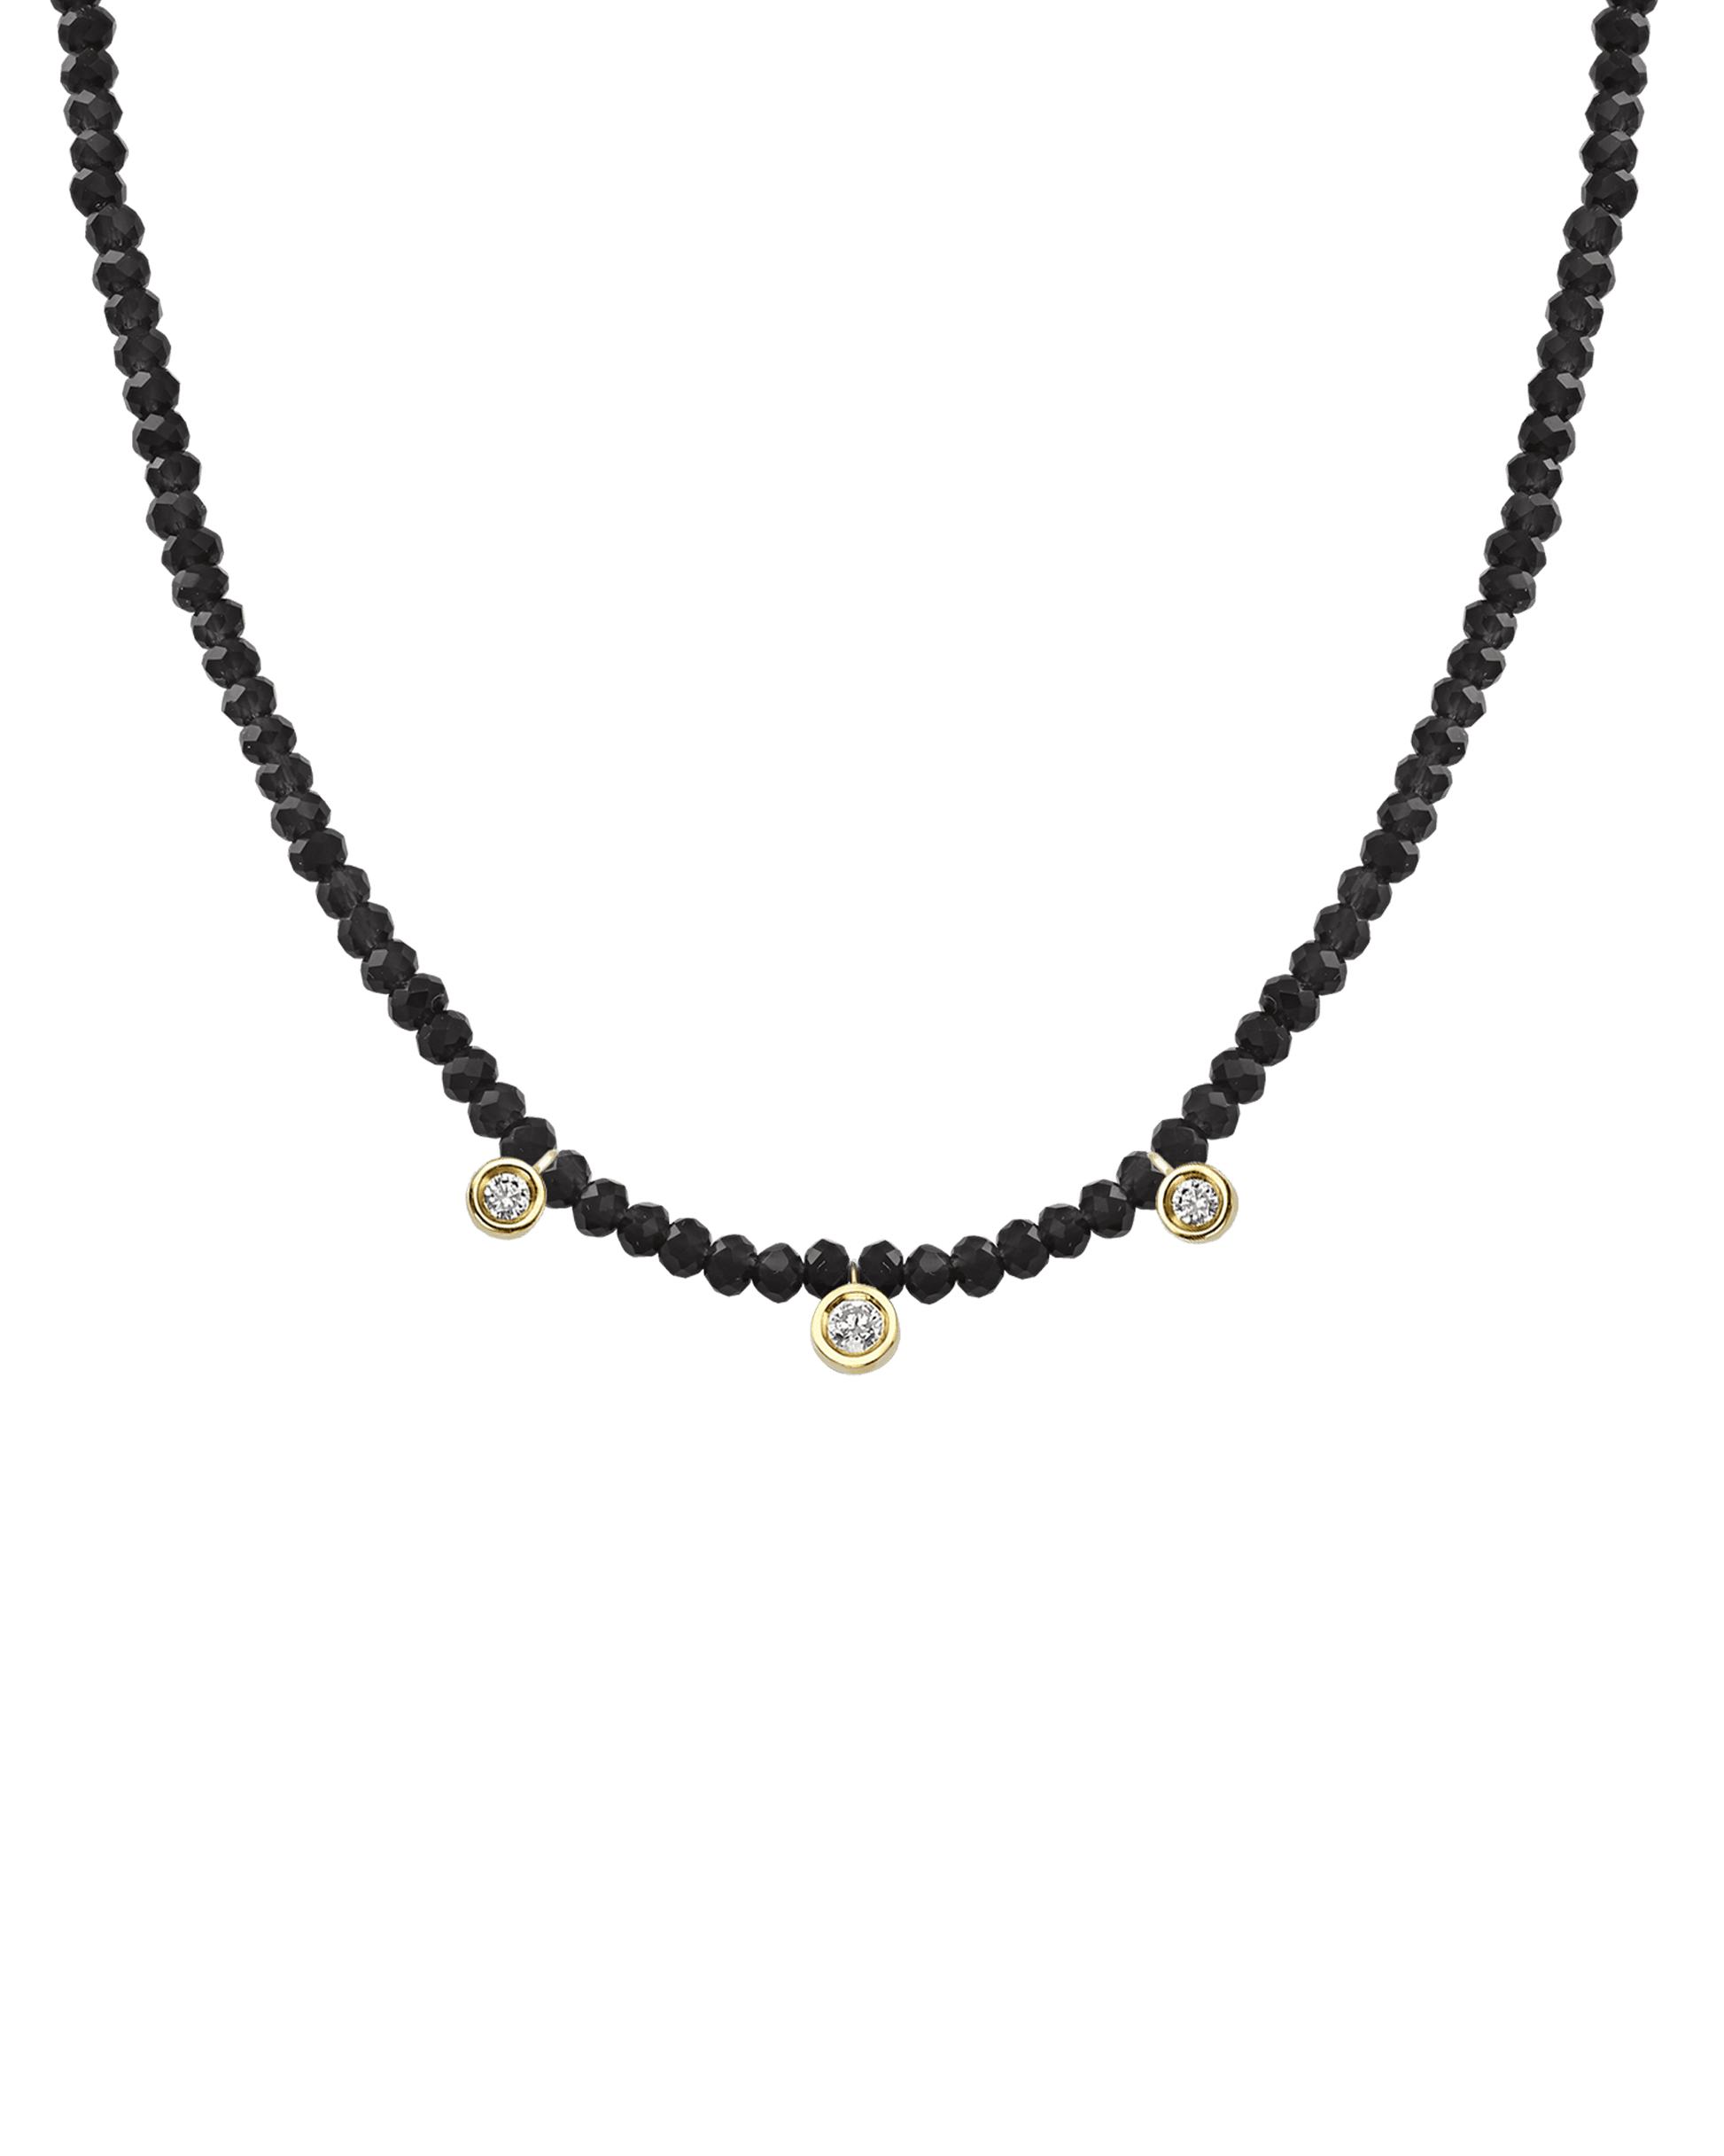 Moonstone Gemstone & Three diamonds Necklace - 14K Yellow Gold Necklaces magal-dev Glass Beads Black Spinnel 14" - Collar 